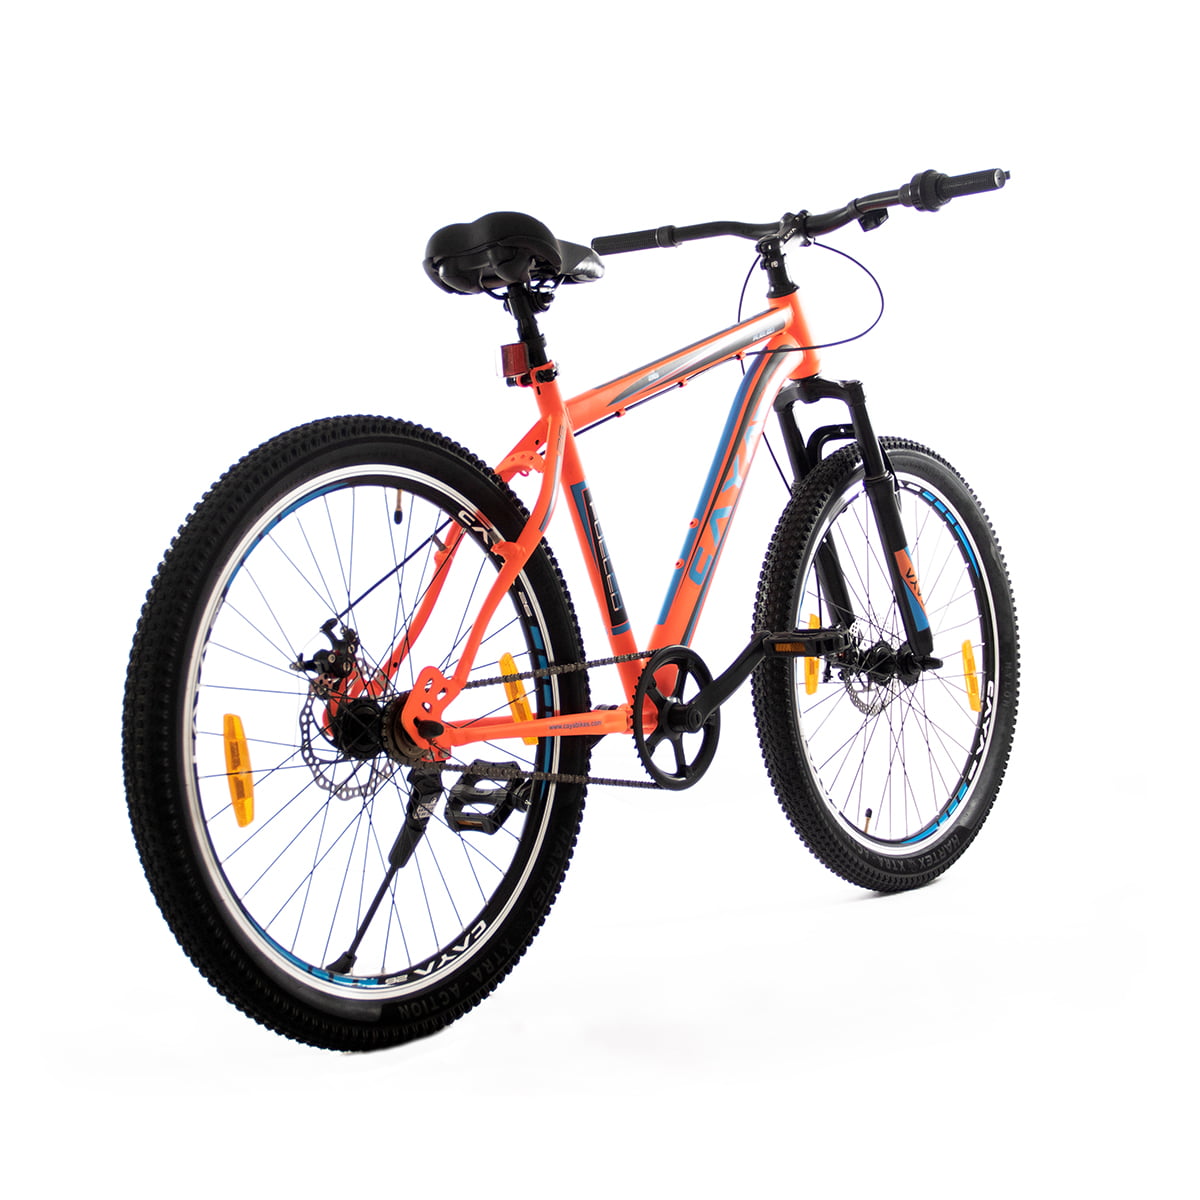 CAYA Fueled 26 Single Speed Cycle with Disc Brakes